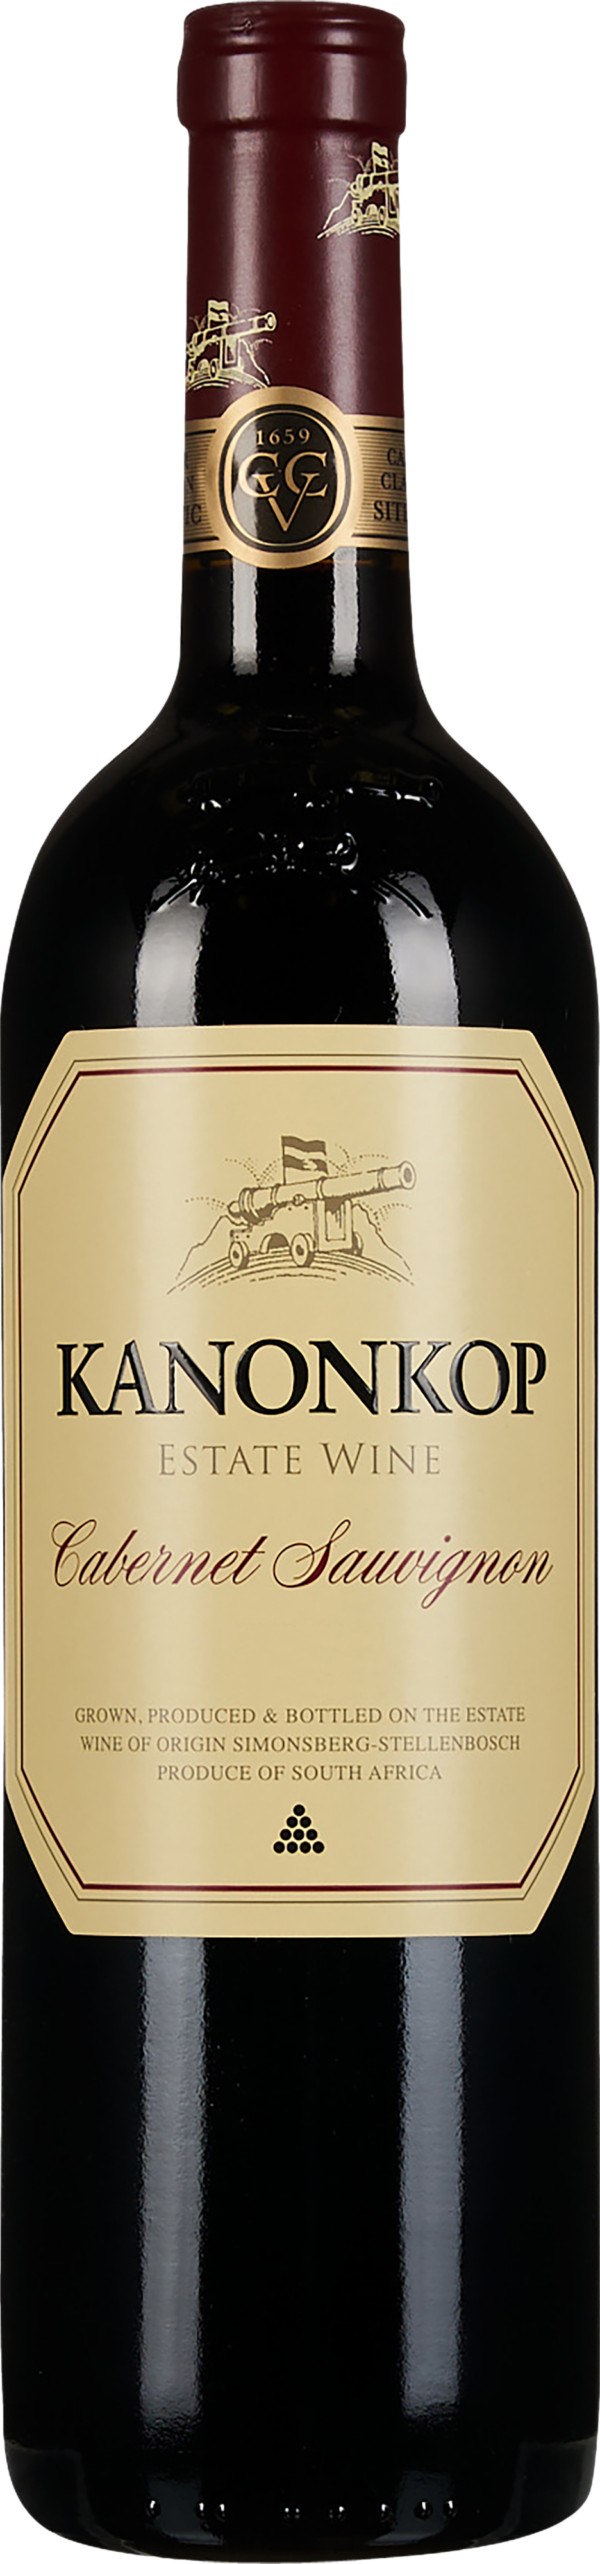 Product image of Kanonkop Estate Cabernet Sauvignon 2017 from 8wines